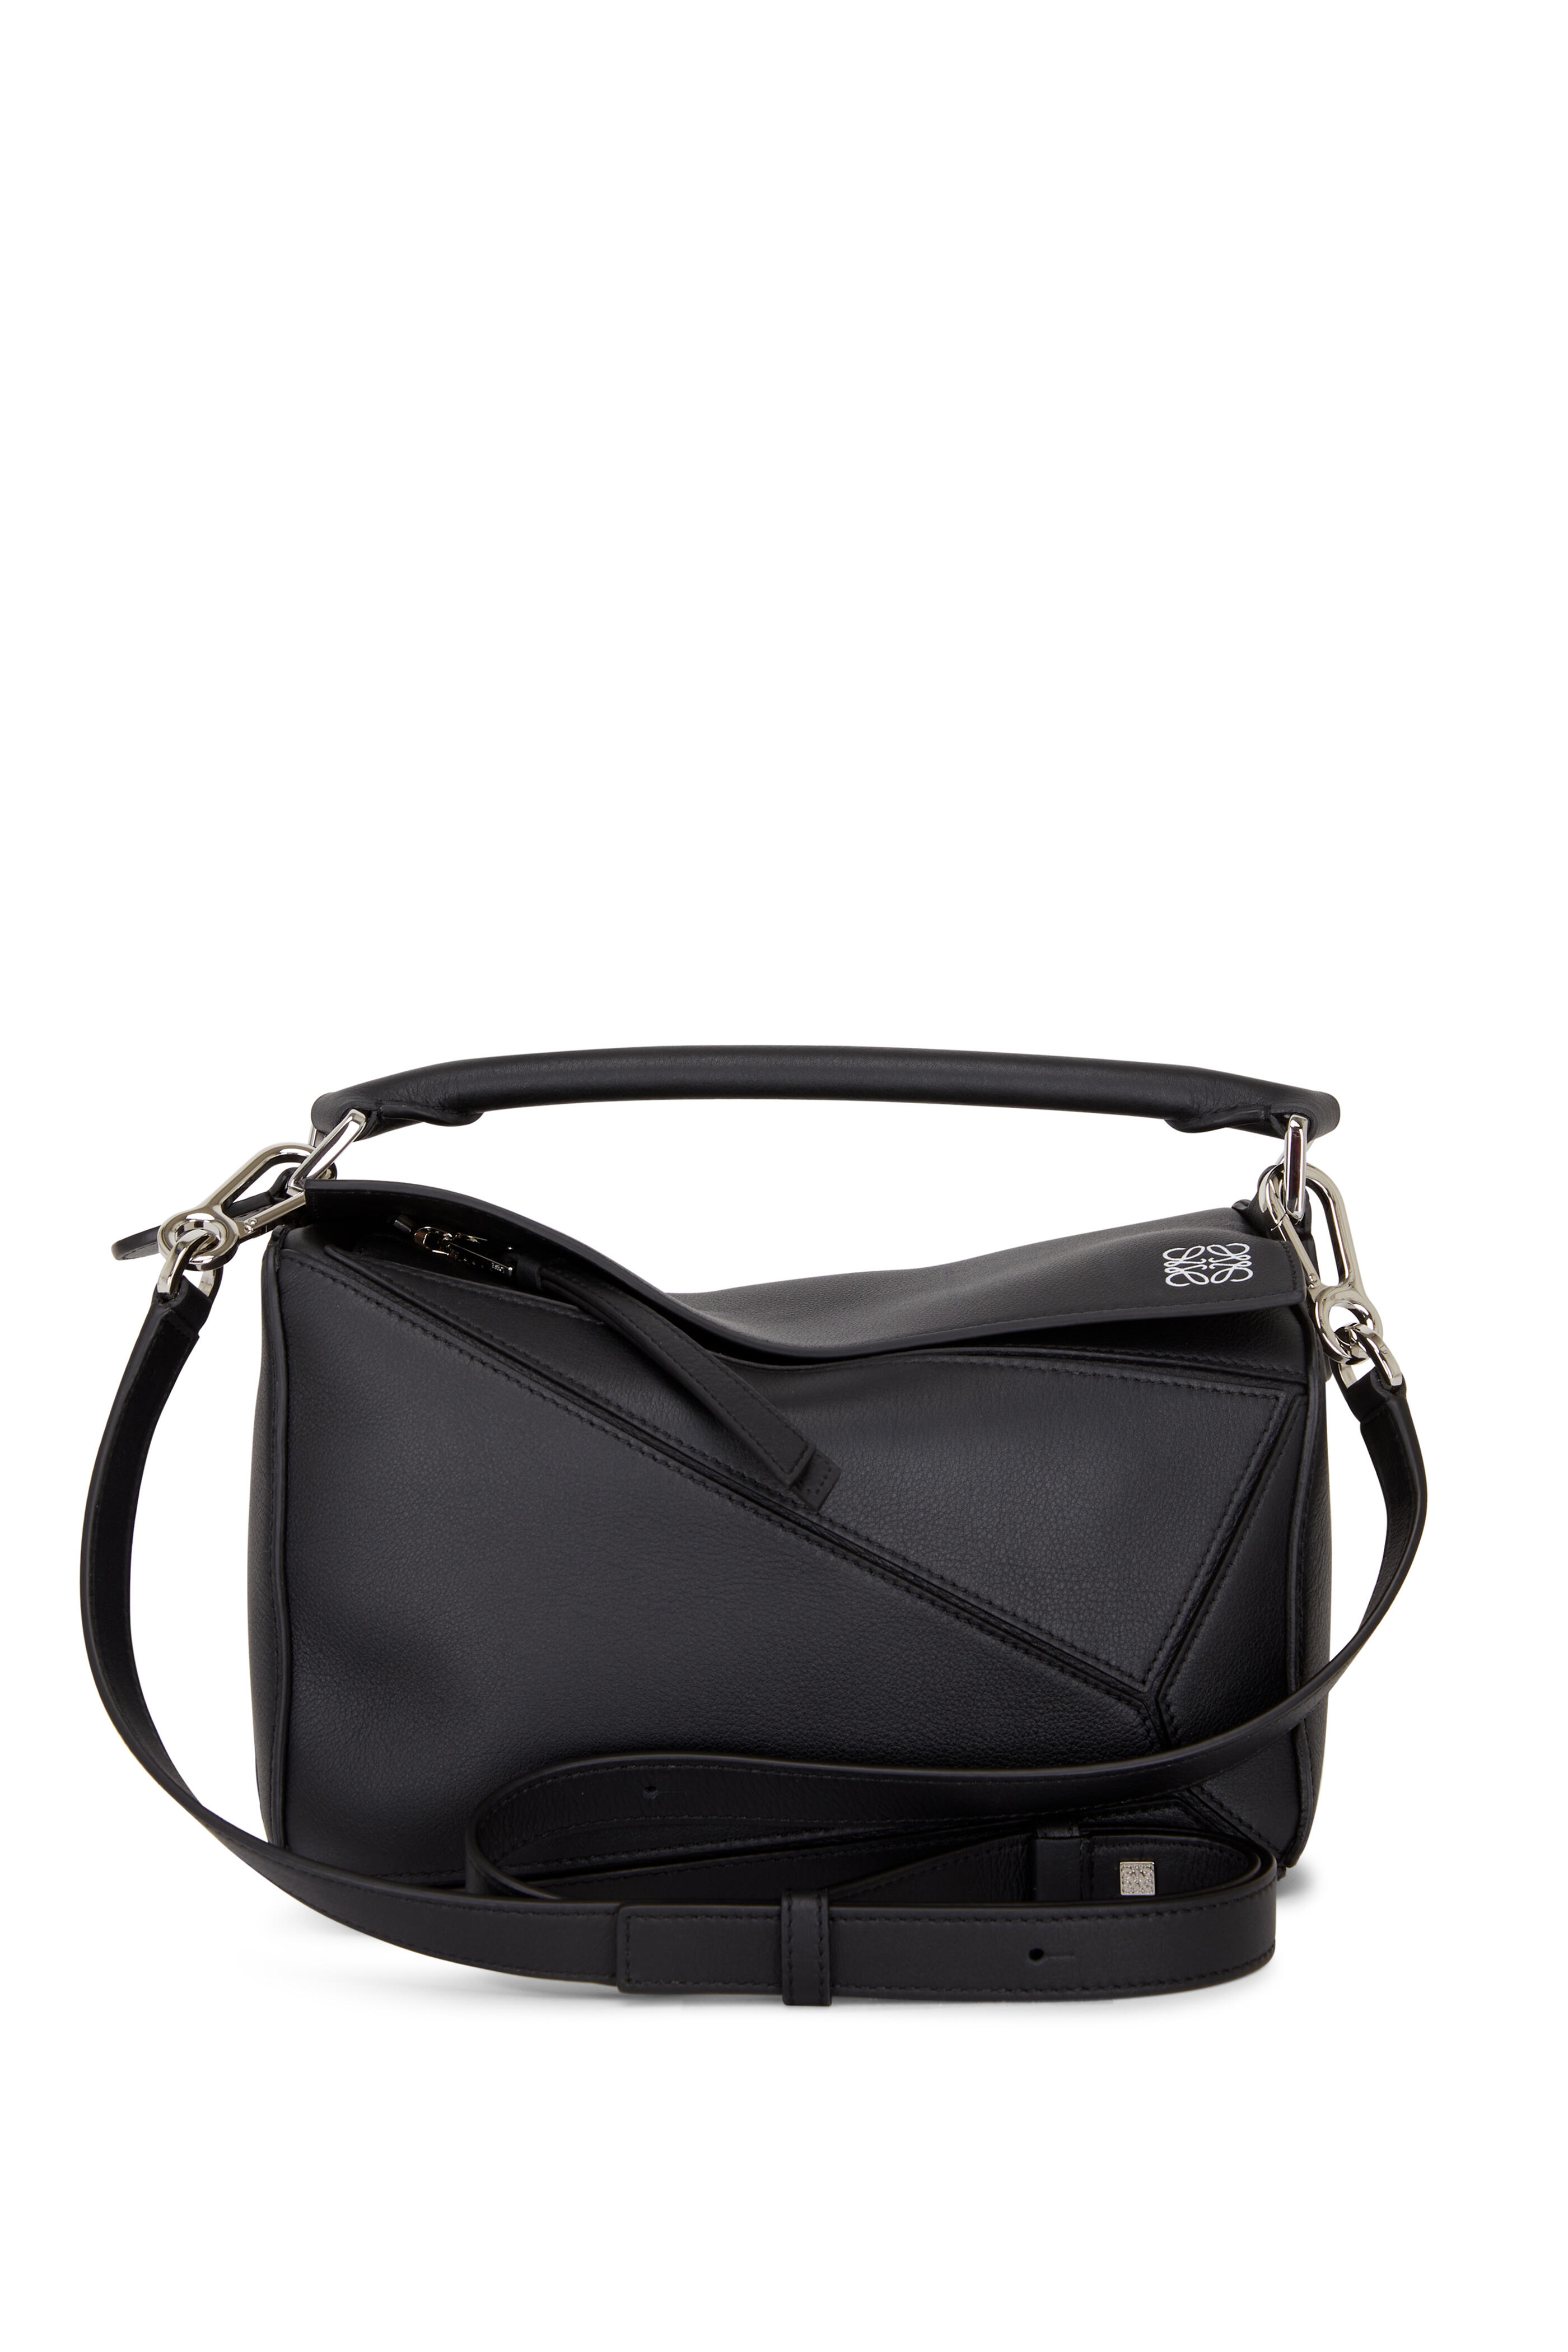 LOEWE Puzzle Small Smooth Leather Bag in Black